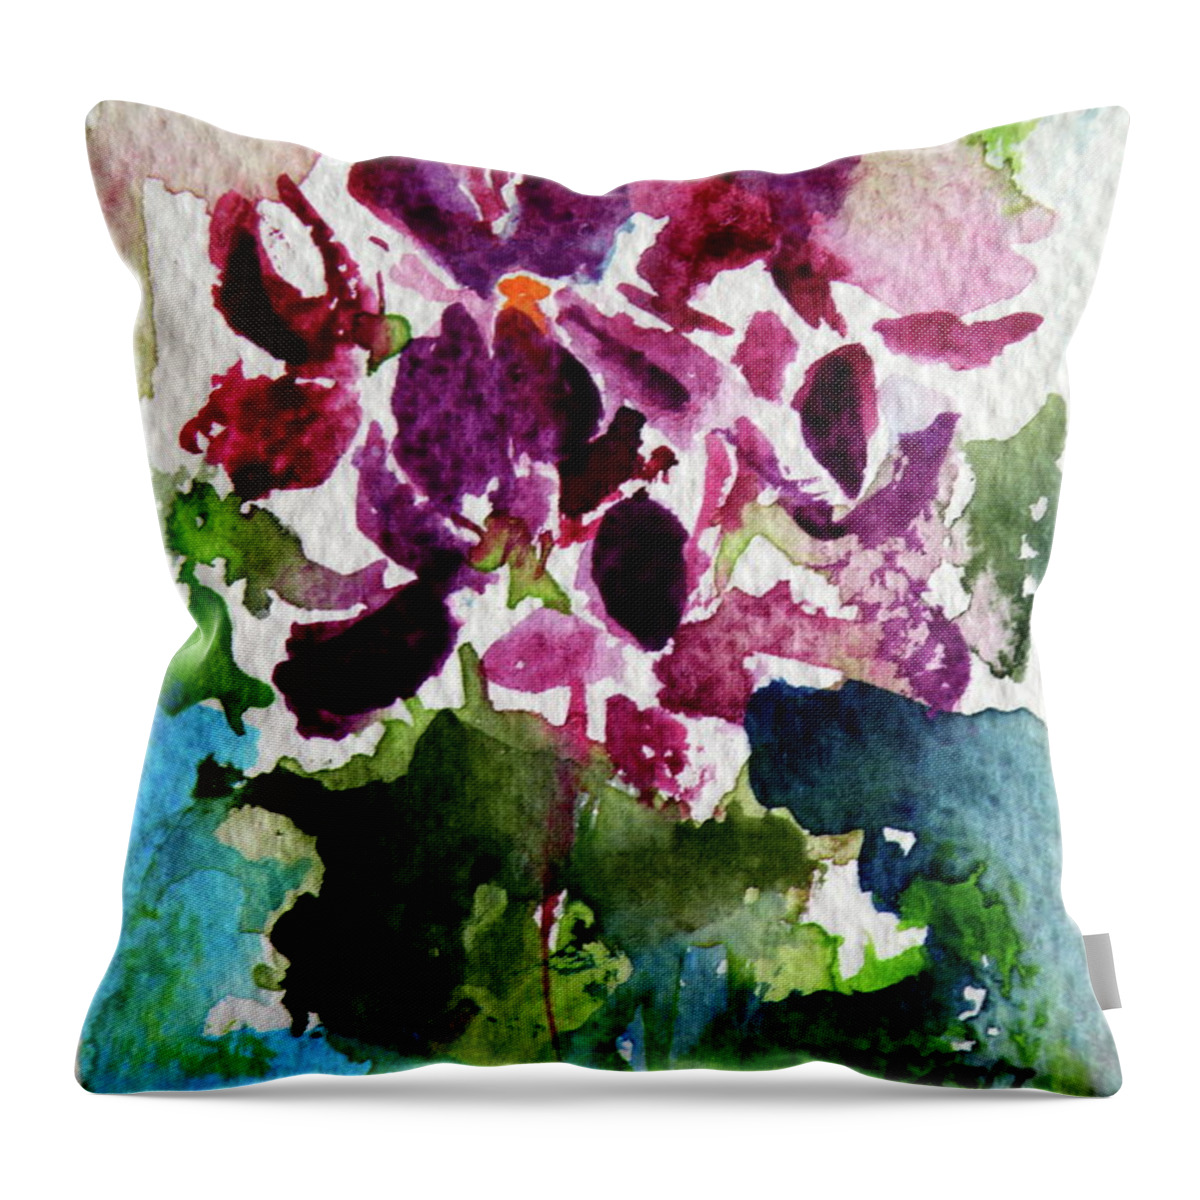 Violet Throw Pillow featuring the painting Violet #2 by Kovacs Anna Brigitta